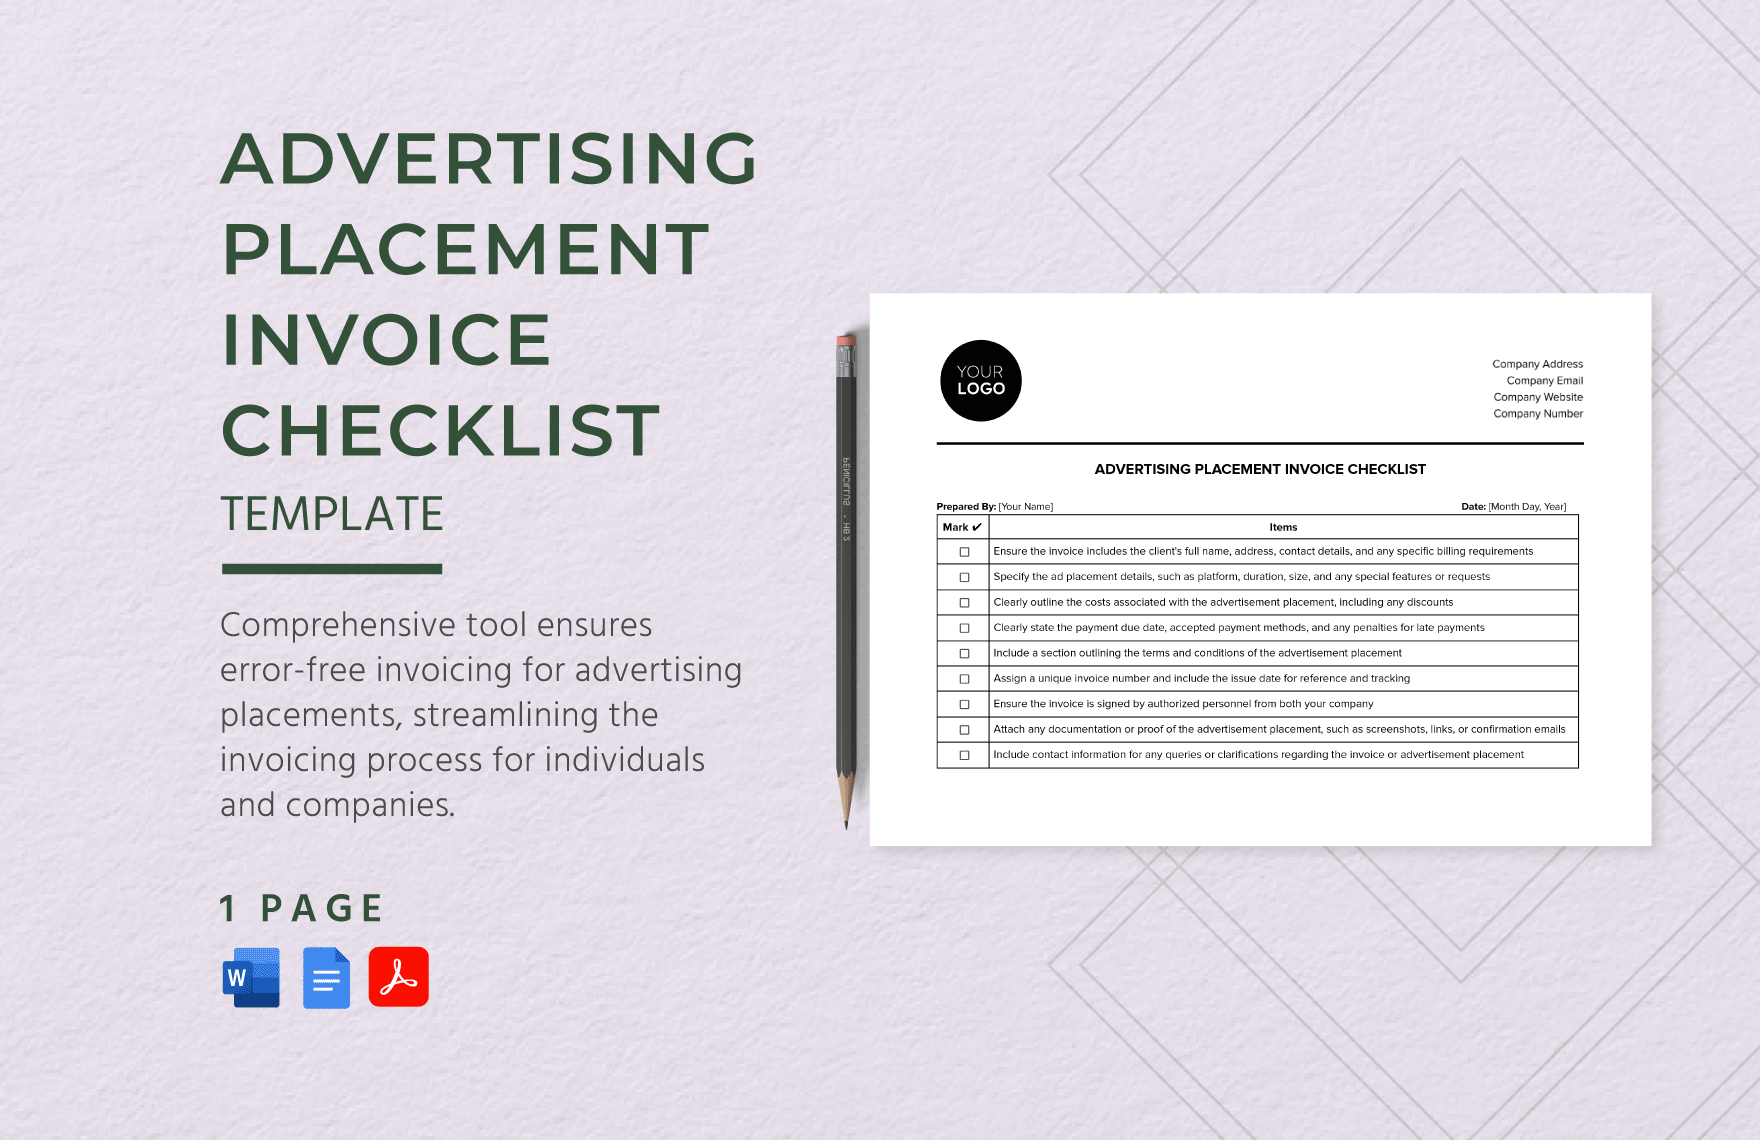 Advertising Placement Invoice Checklist Template